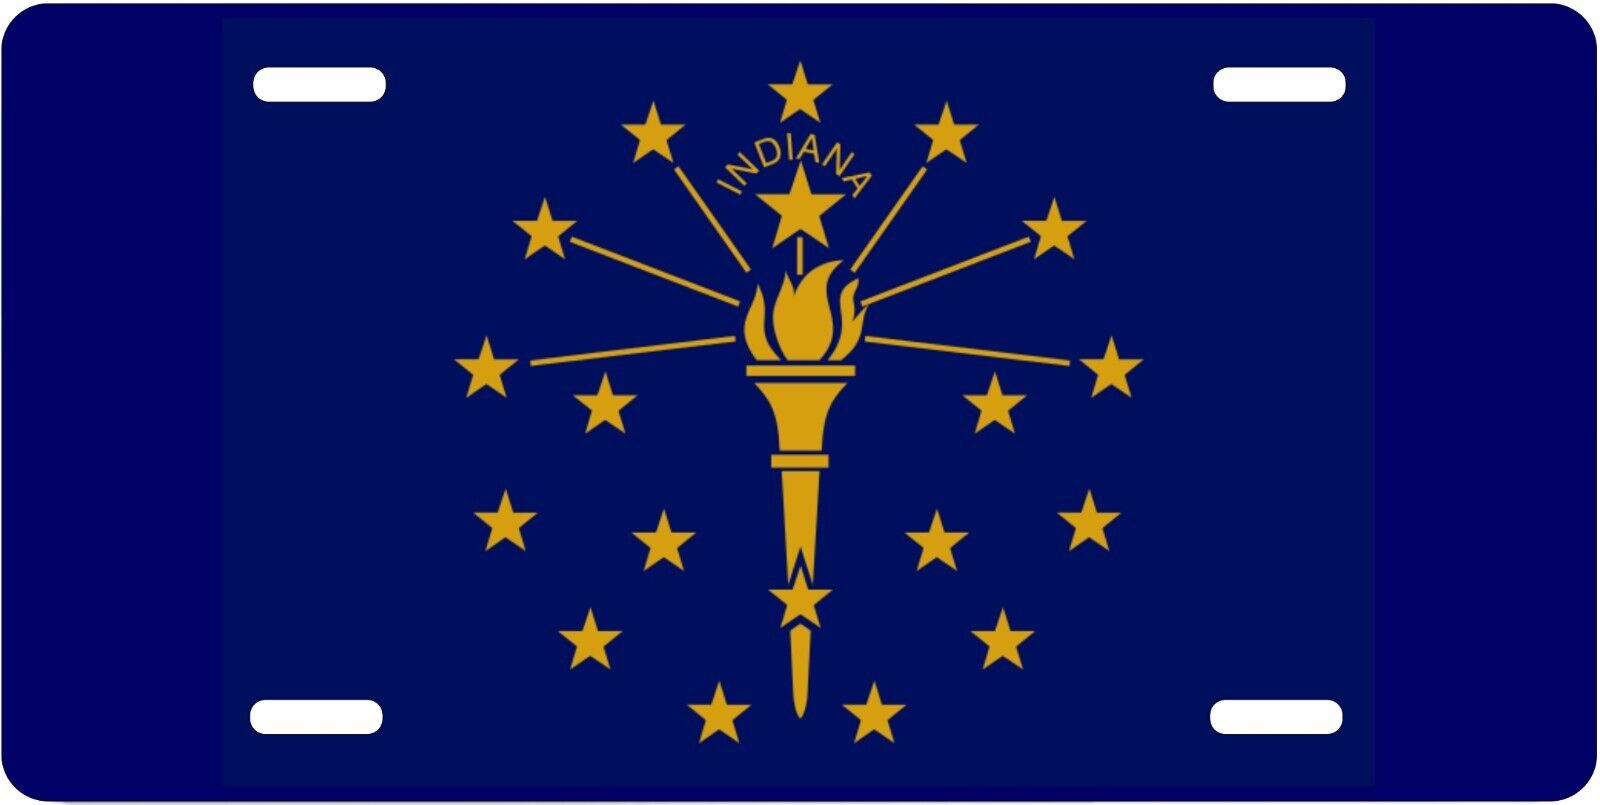 Indiana State Flag LICENSE PLATE FRONT AUTO USA MADE SUV CAR TRUCK